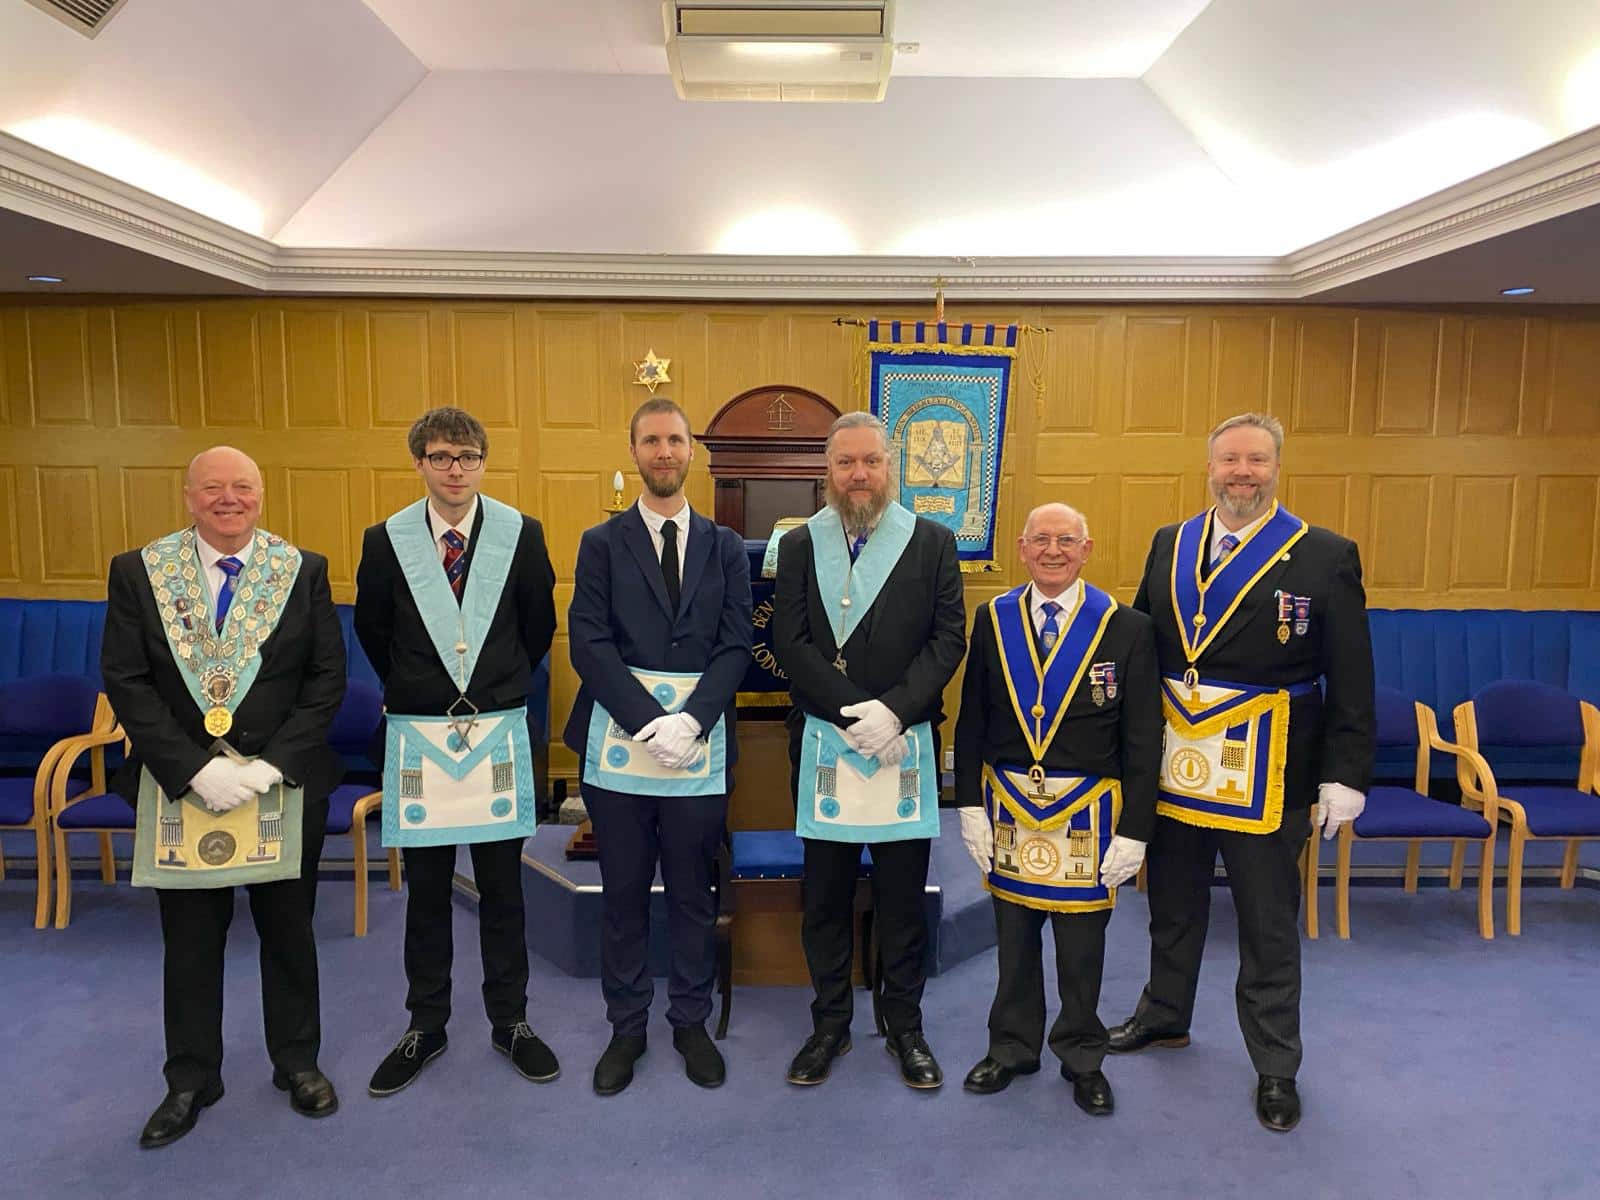 Traditional History at Ben Brierley Lodge 3317